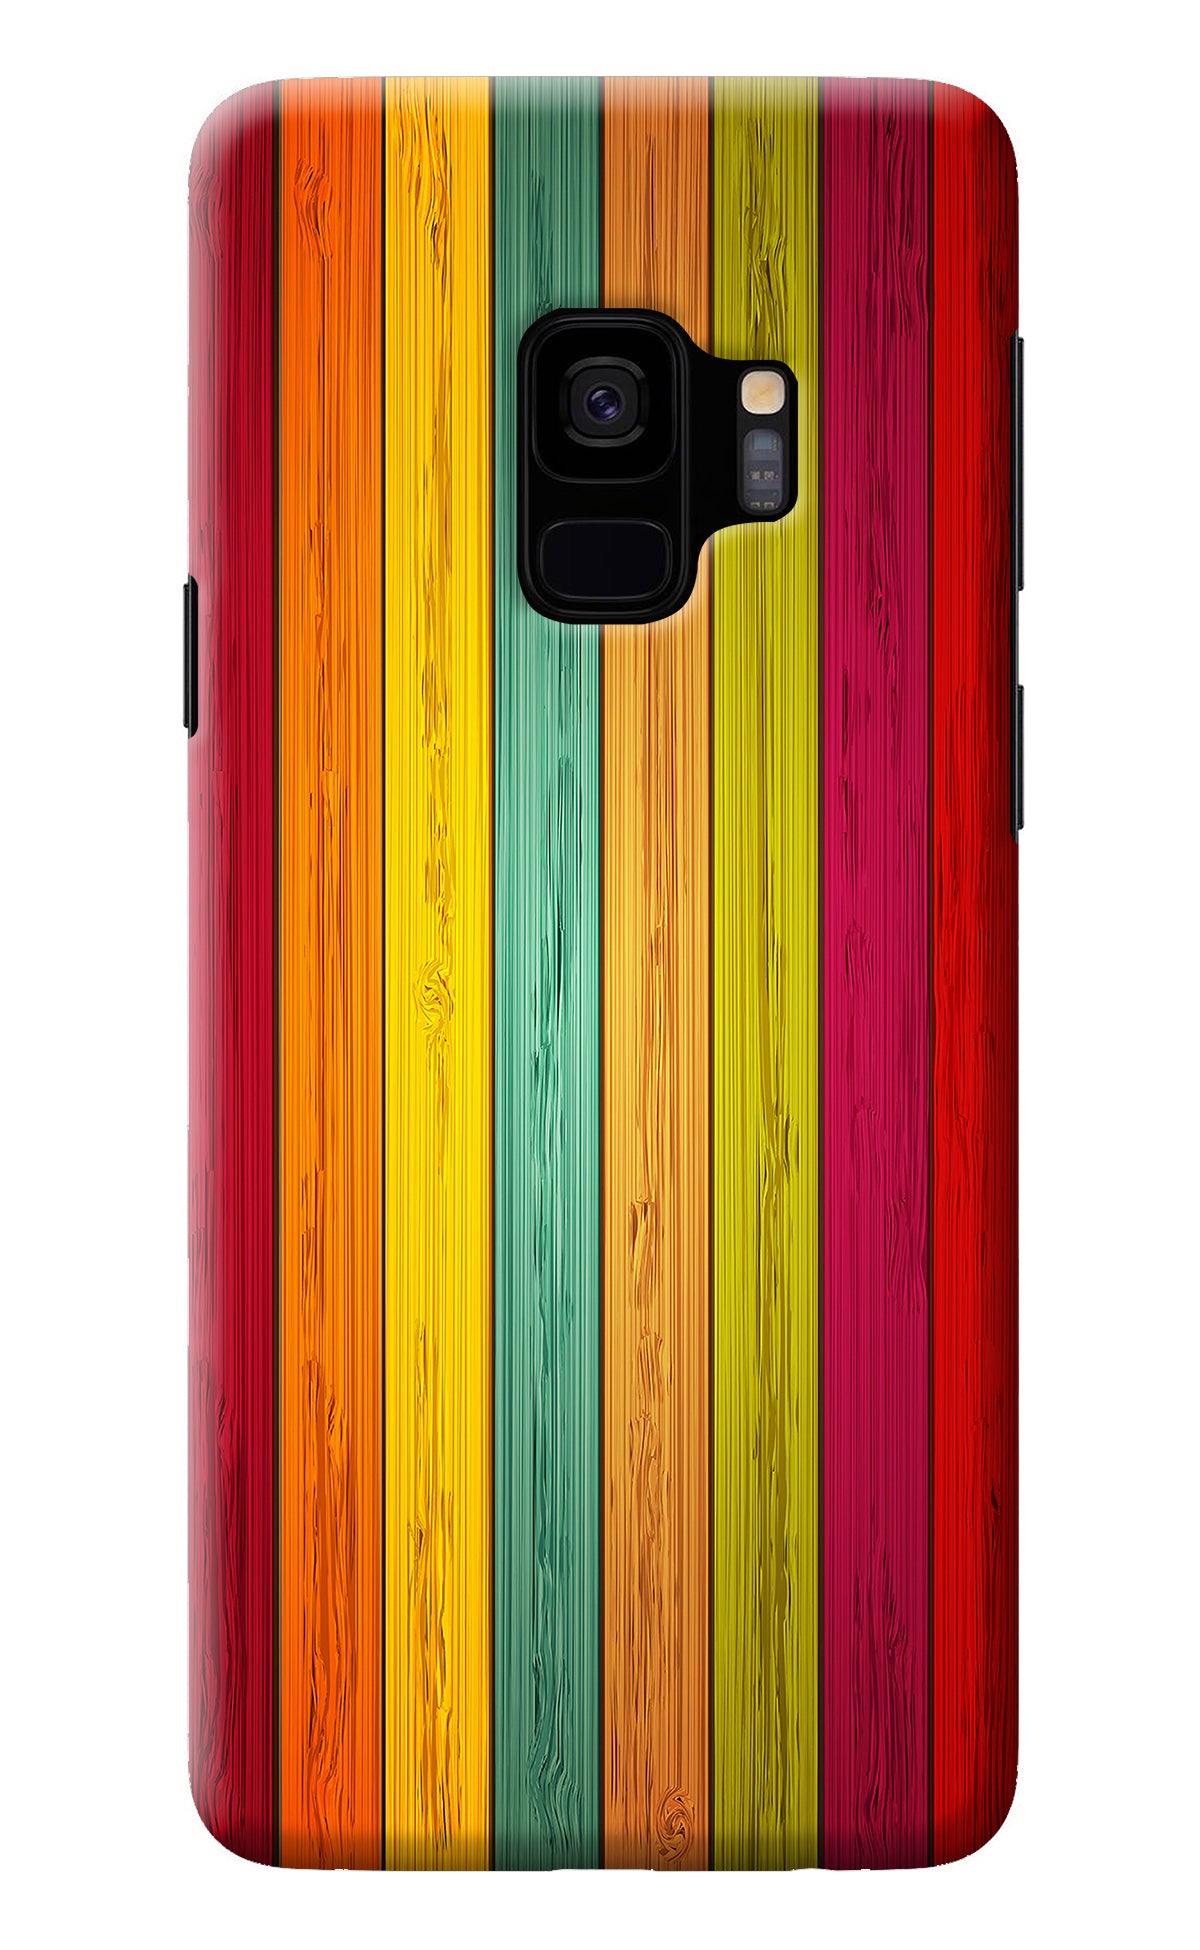 Multicolor Wooden Samsung S9 Back Cover